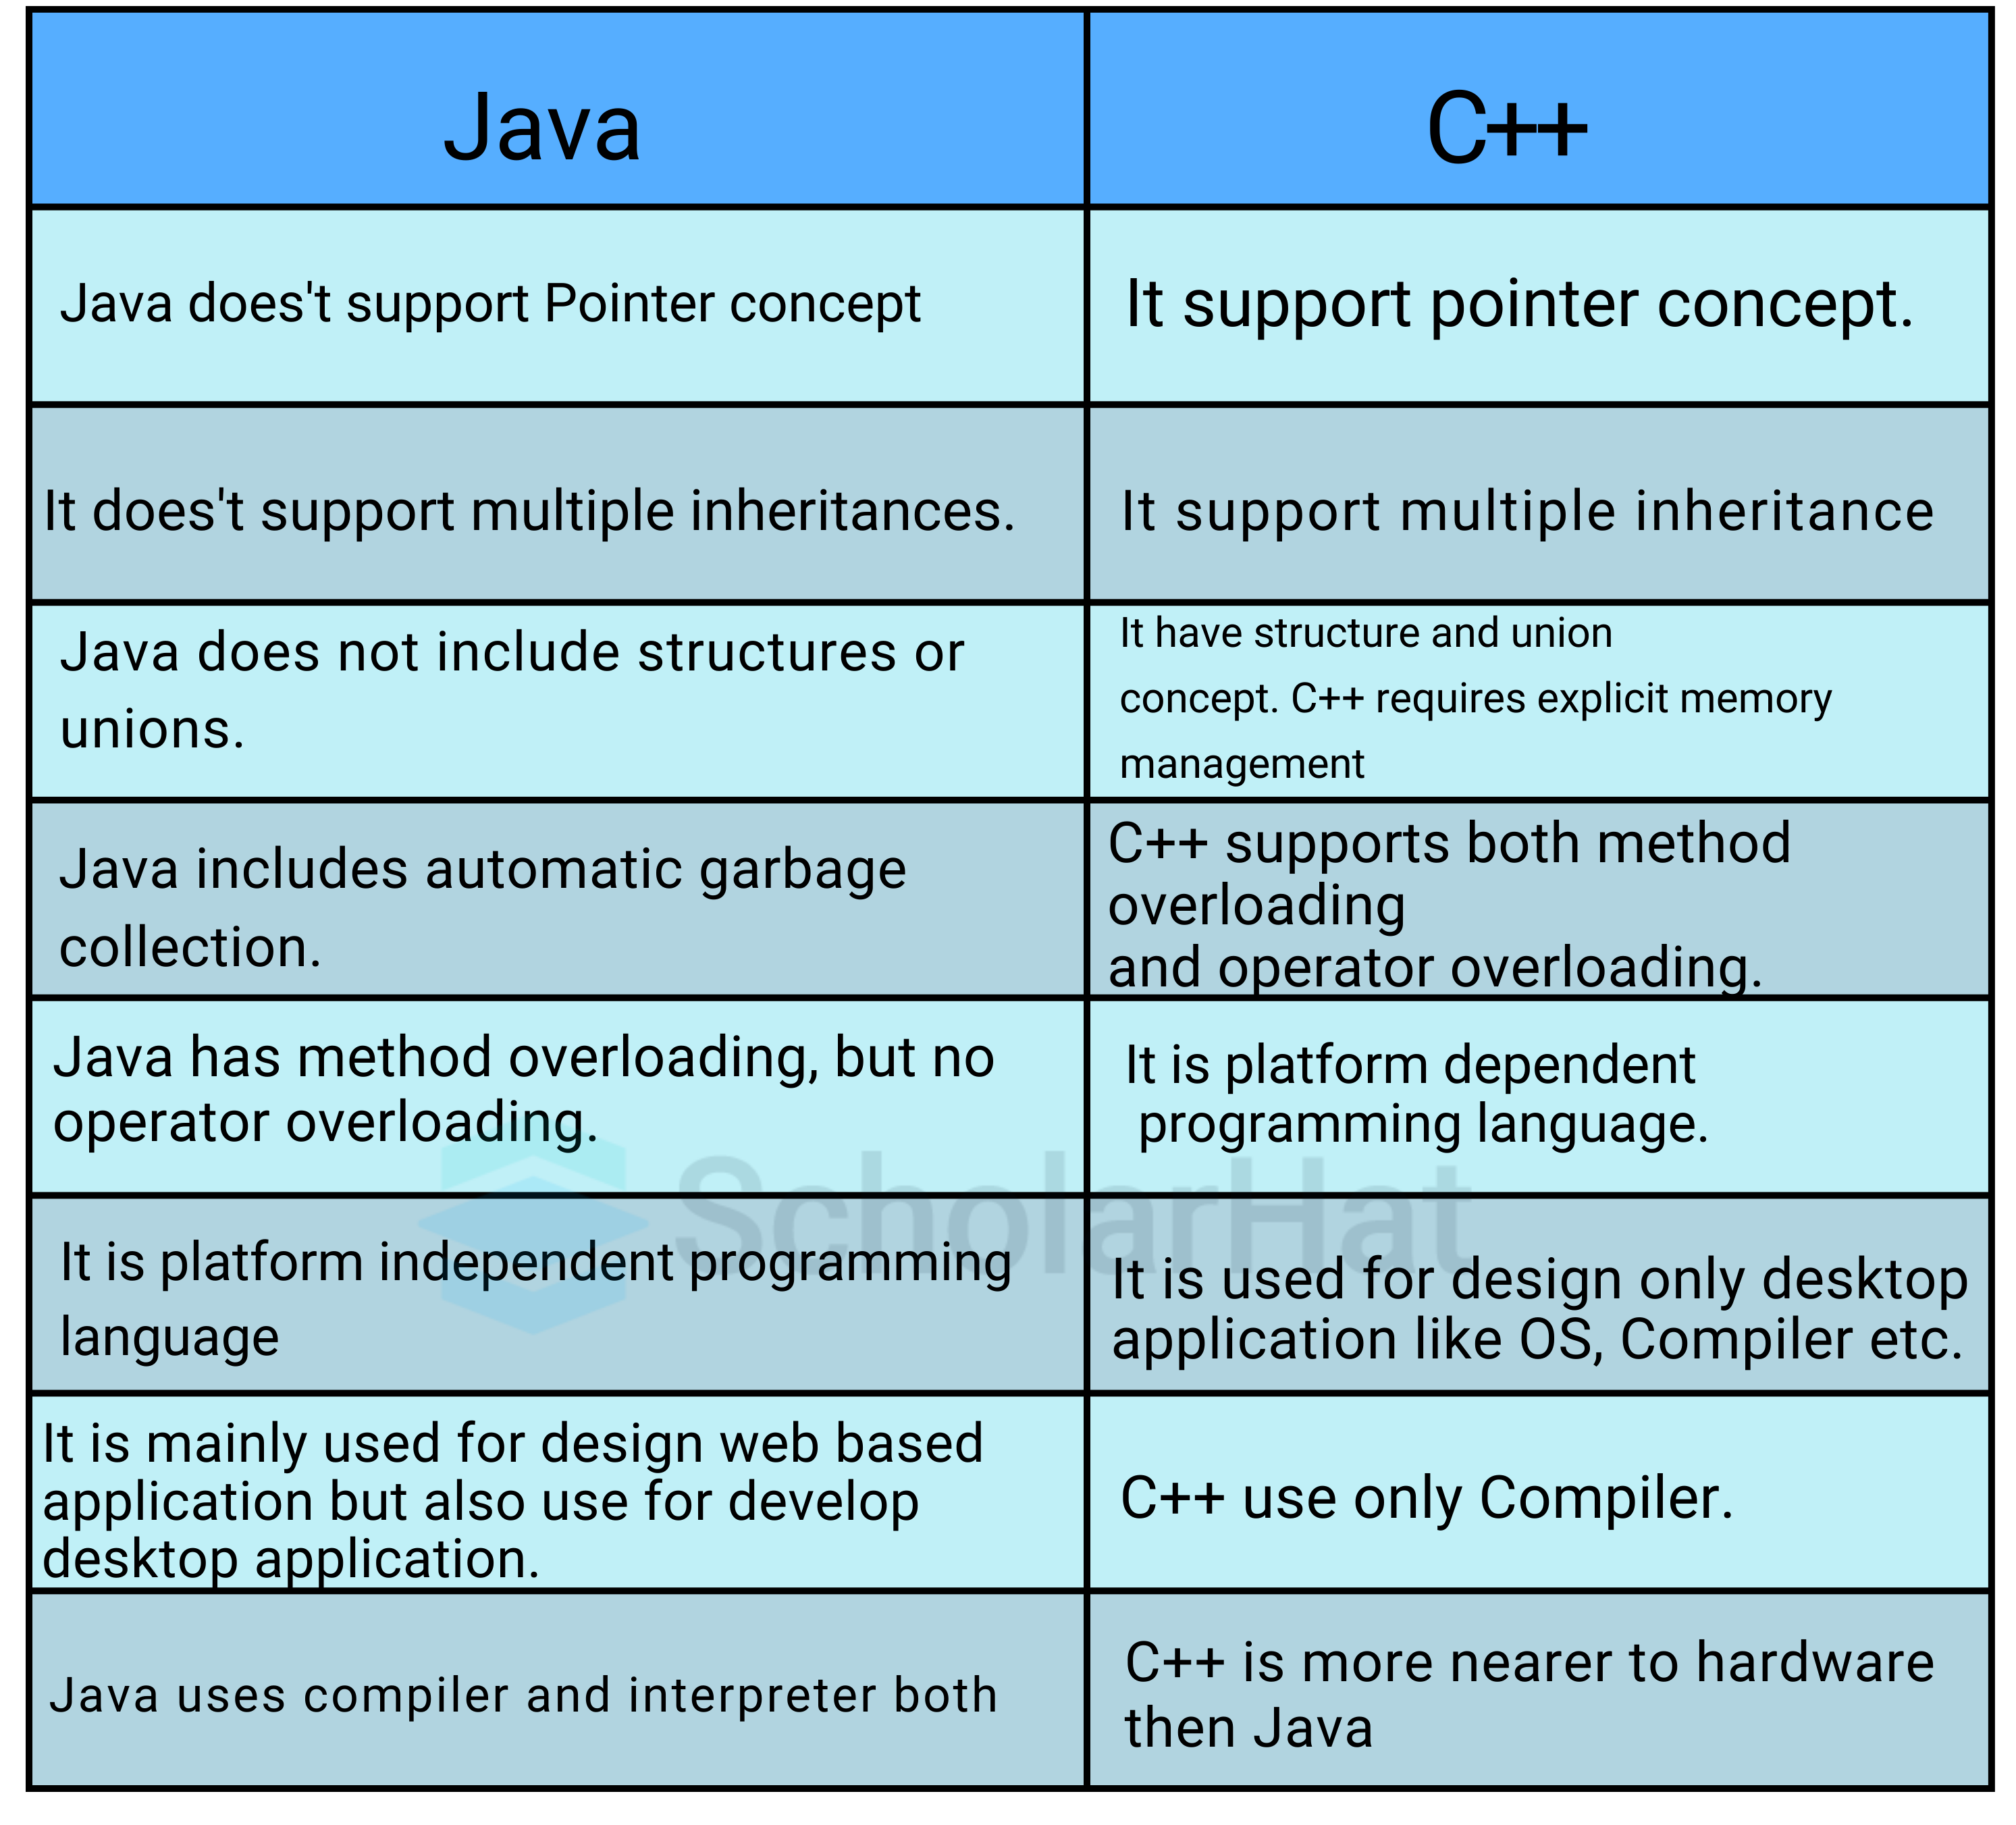  What is the difference between Java and C++?